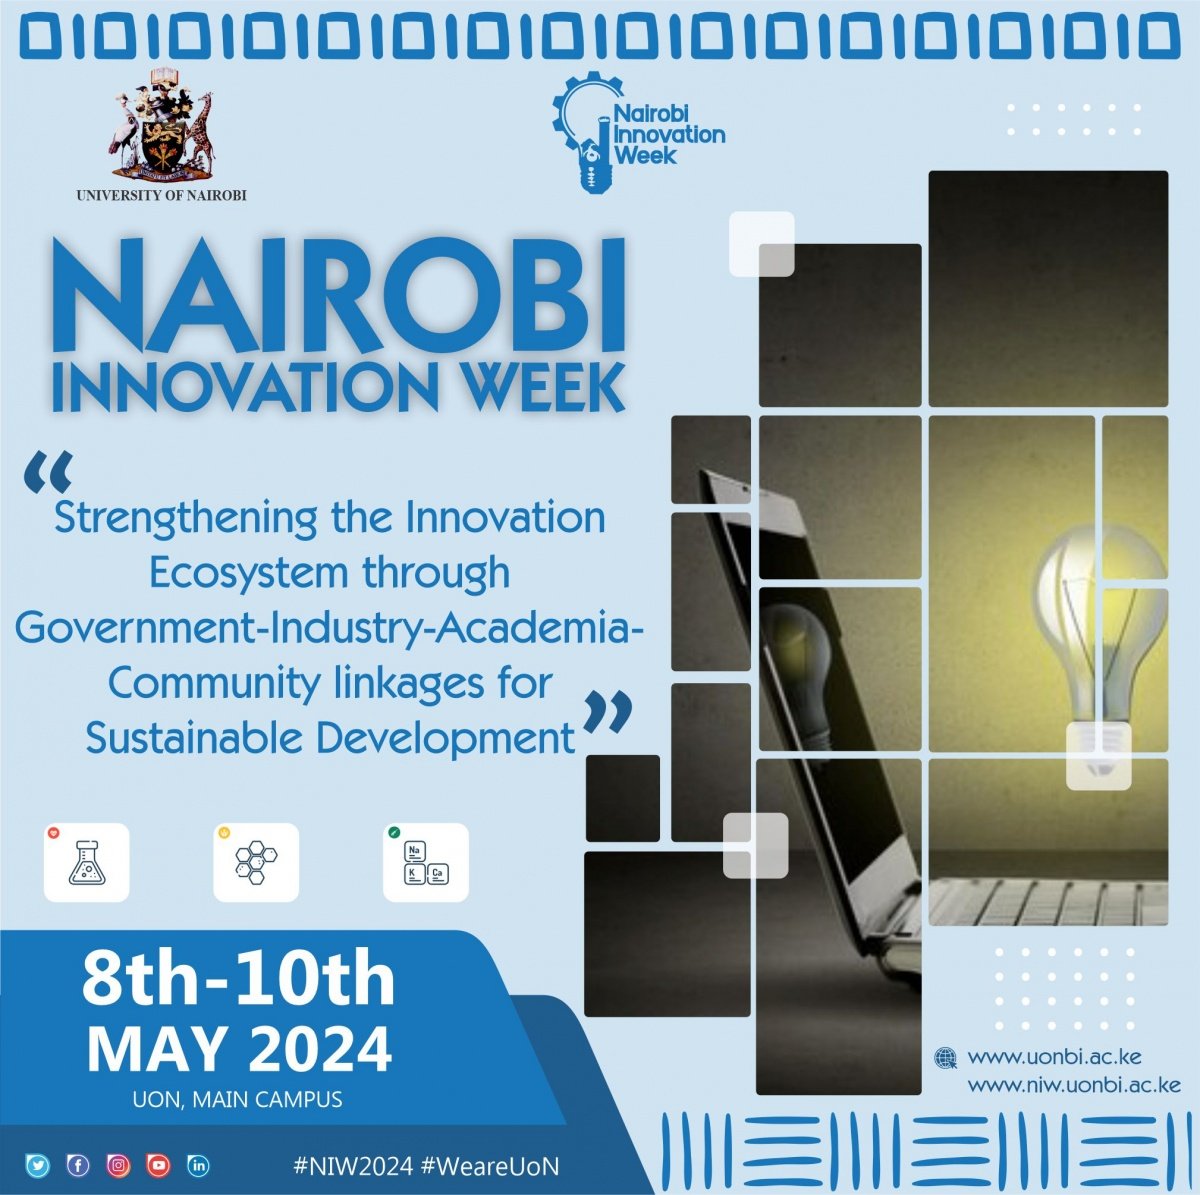 Welcome to Day 2 of Nairobi Innovation Week. Join us for panel discussions, exhibition visits & NIW hackathon where innovators are ready to showcase their cutting edge innovations in different fields. #NIW2024 #weareuon Venue: UoN Main Campus niw.uonbi.ac.ke